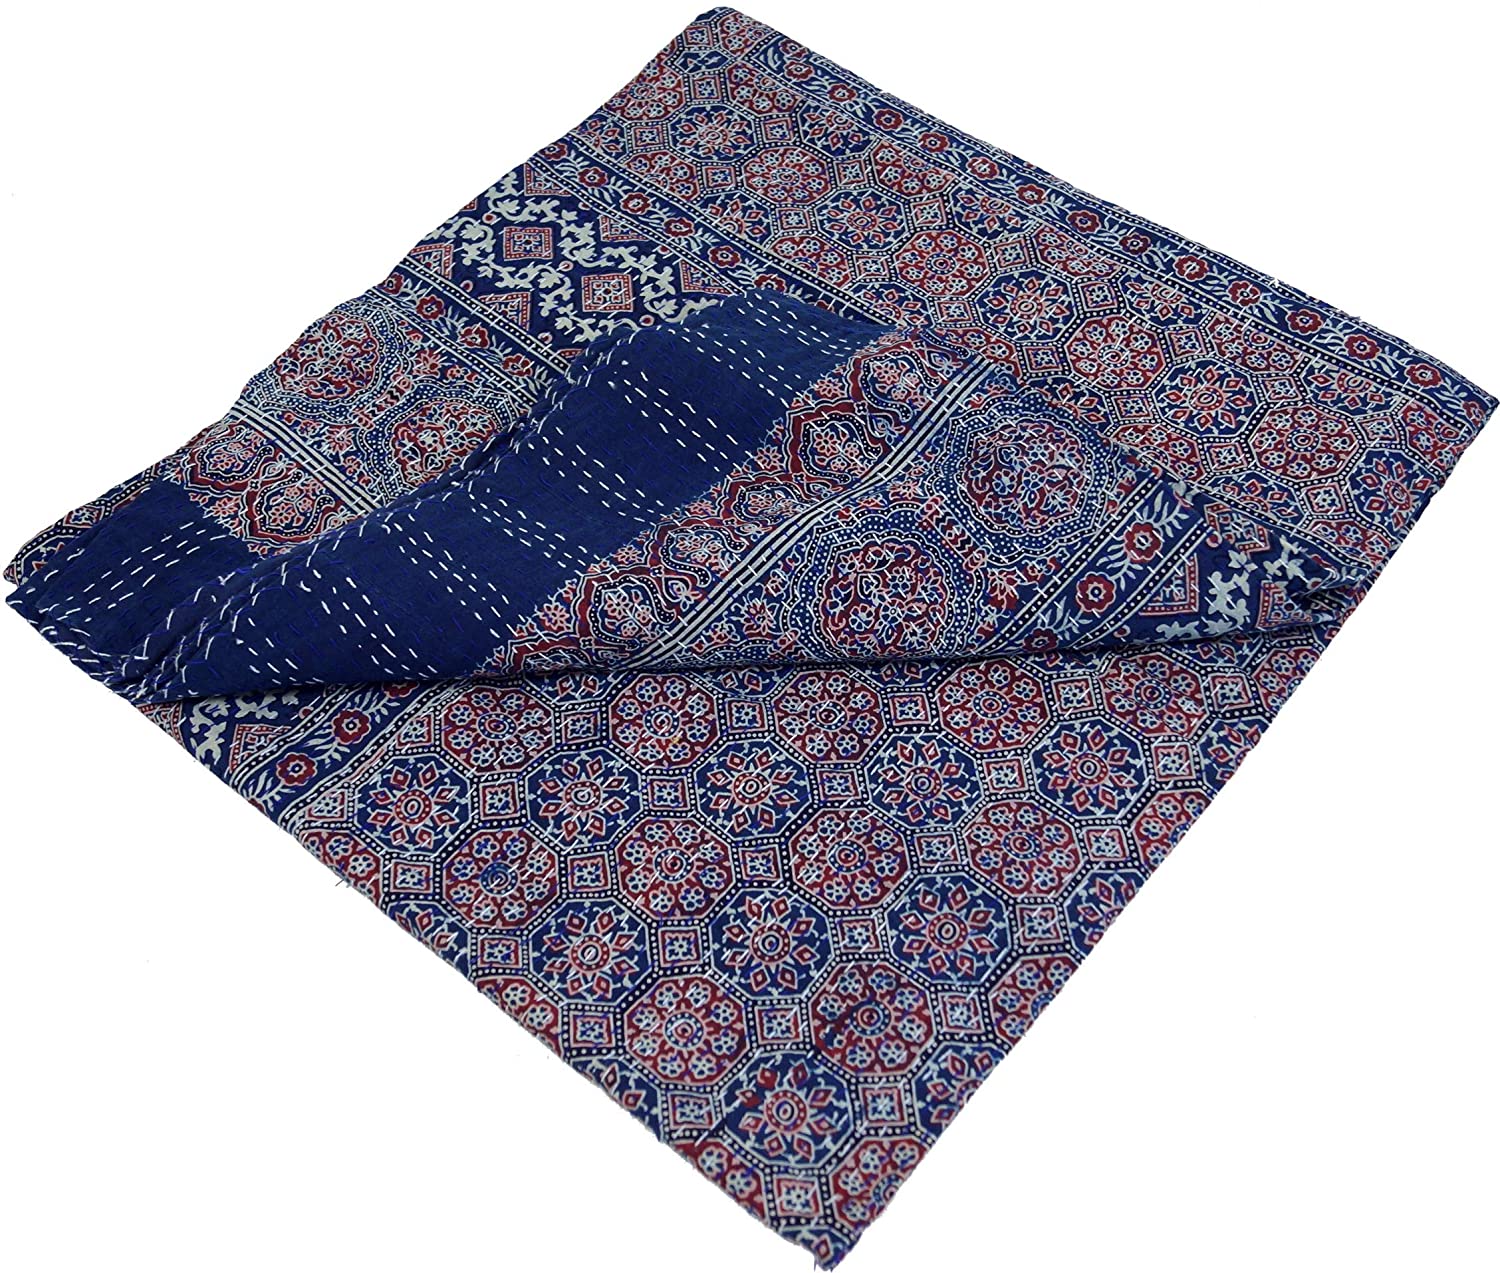 Guru-Shop GURU SHOP Quilt, Bedspread, Bed Throw, Embroidered Cloth, Indian Bed Throw, Bedspread, Pattern 14, Blue, Cotton, 275 x 225 cm, Quilts & Quilts